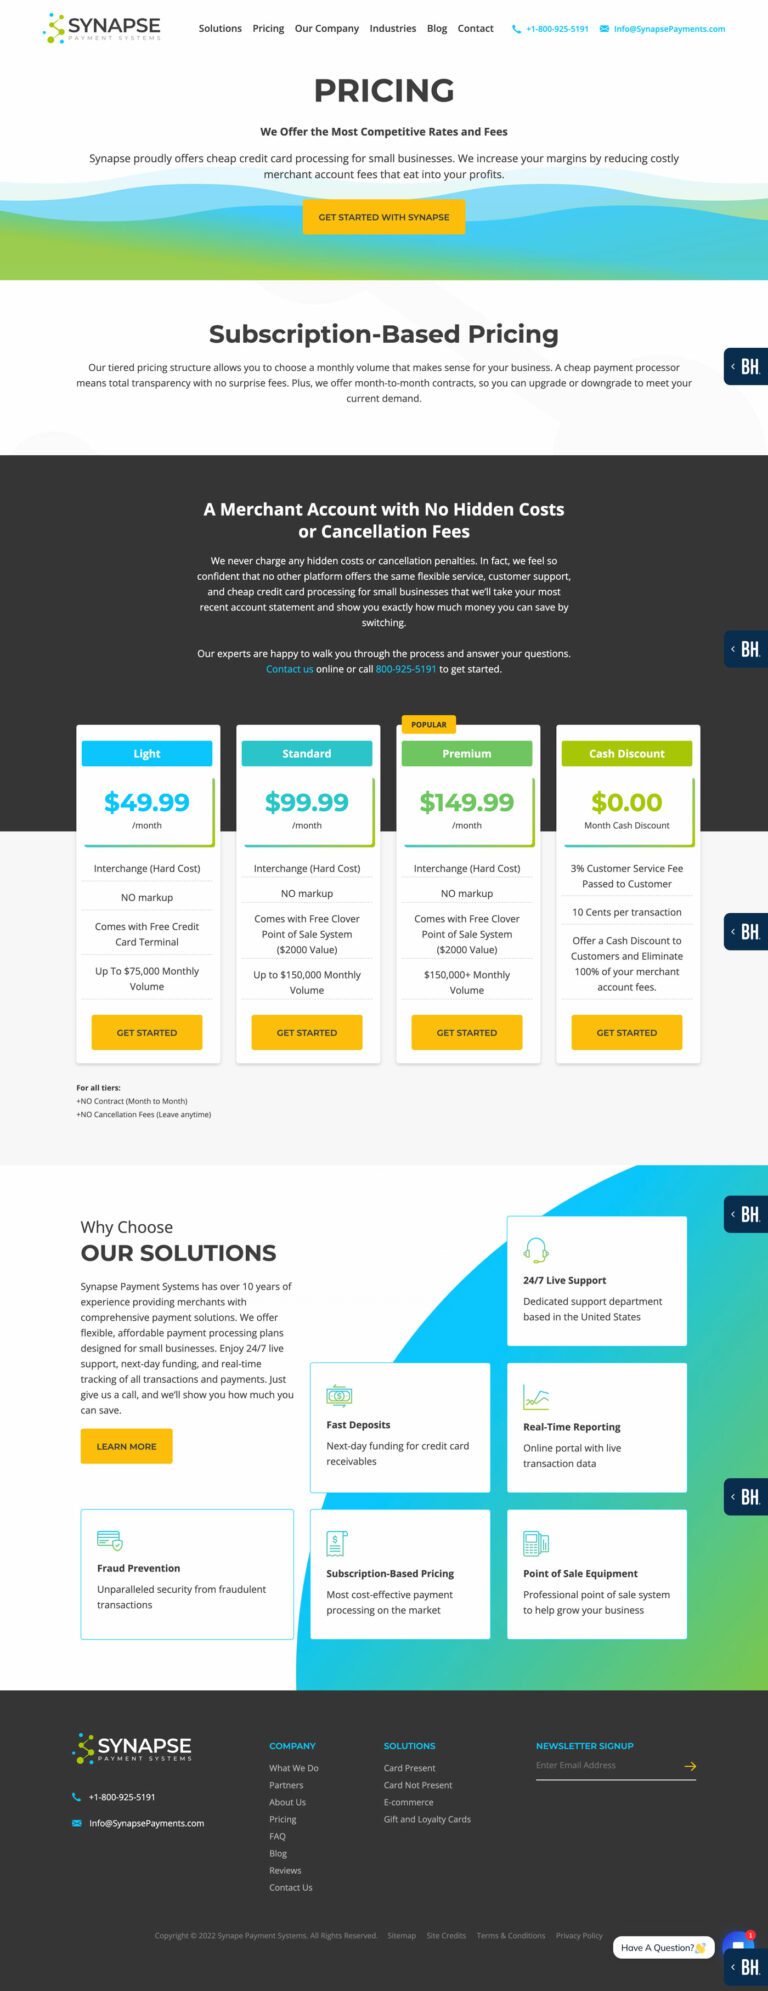 Pricing page for Synapse Payments